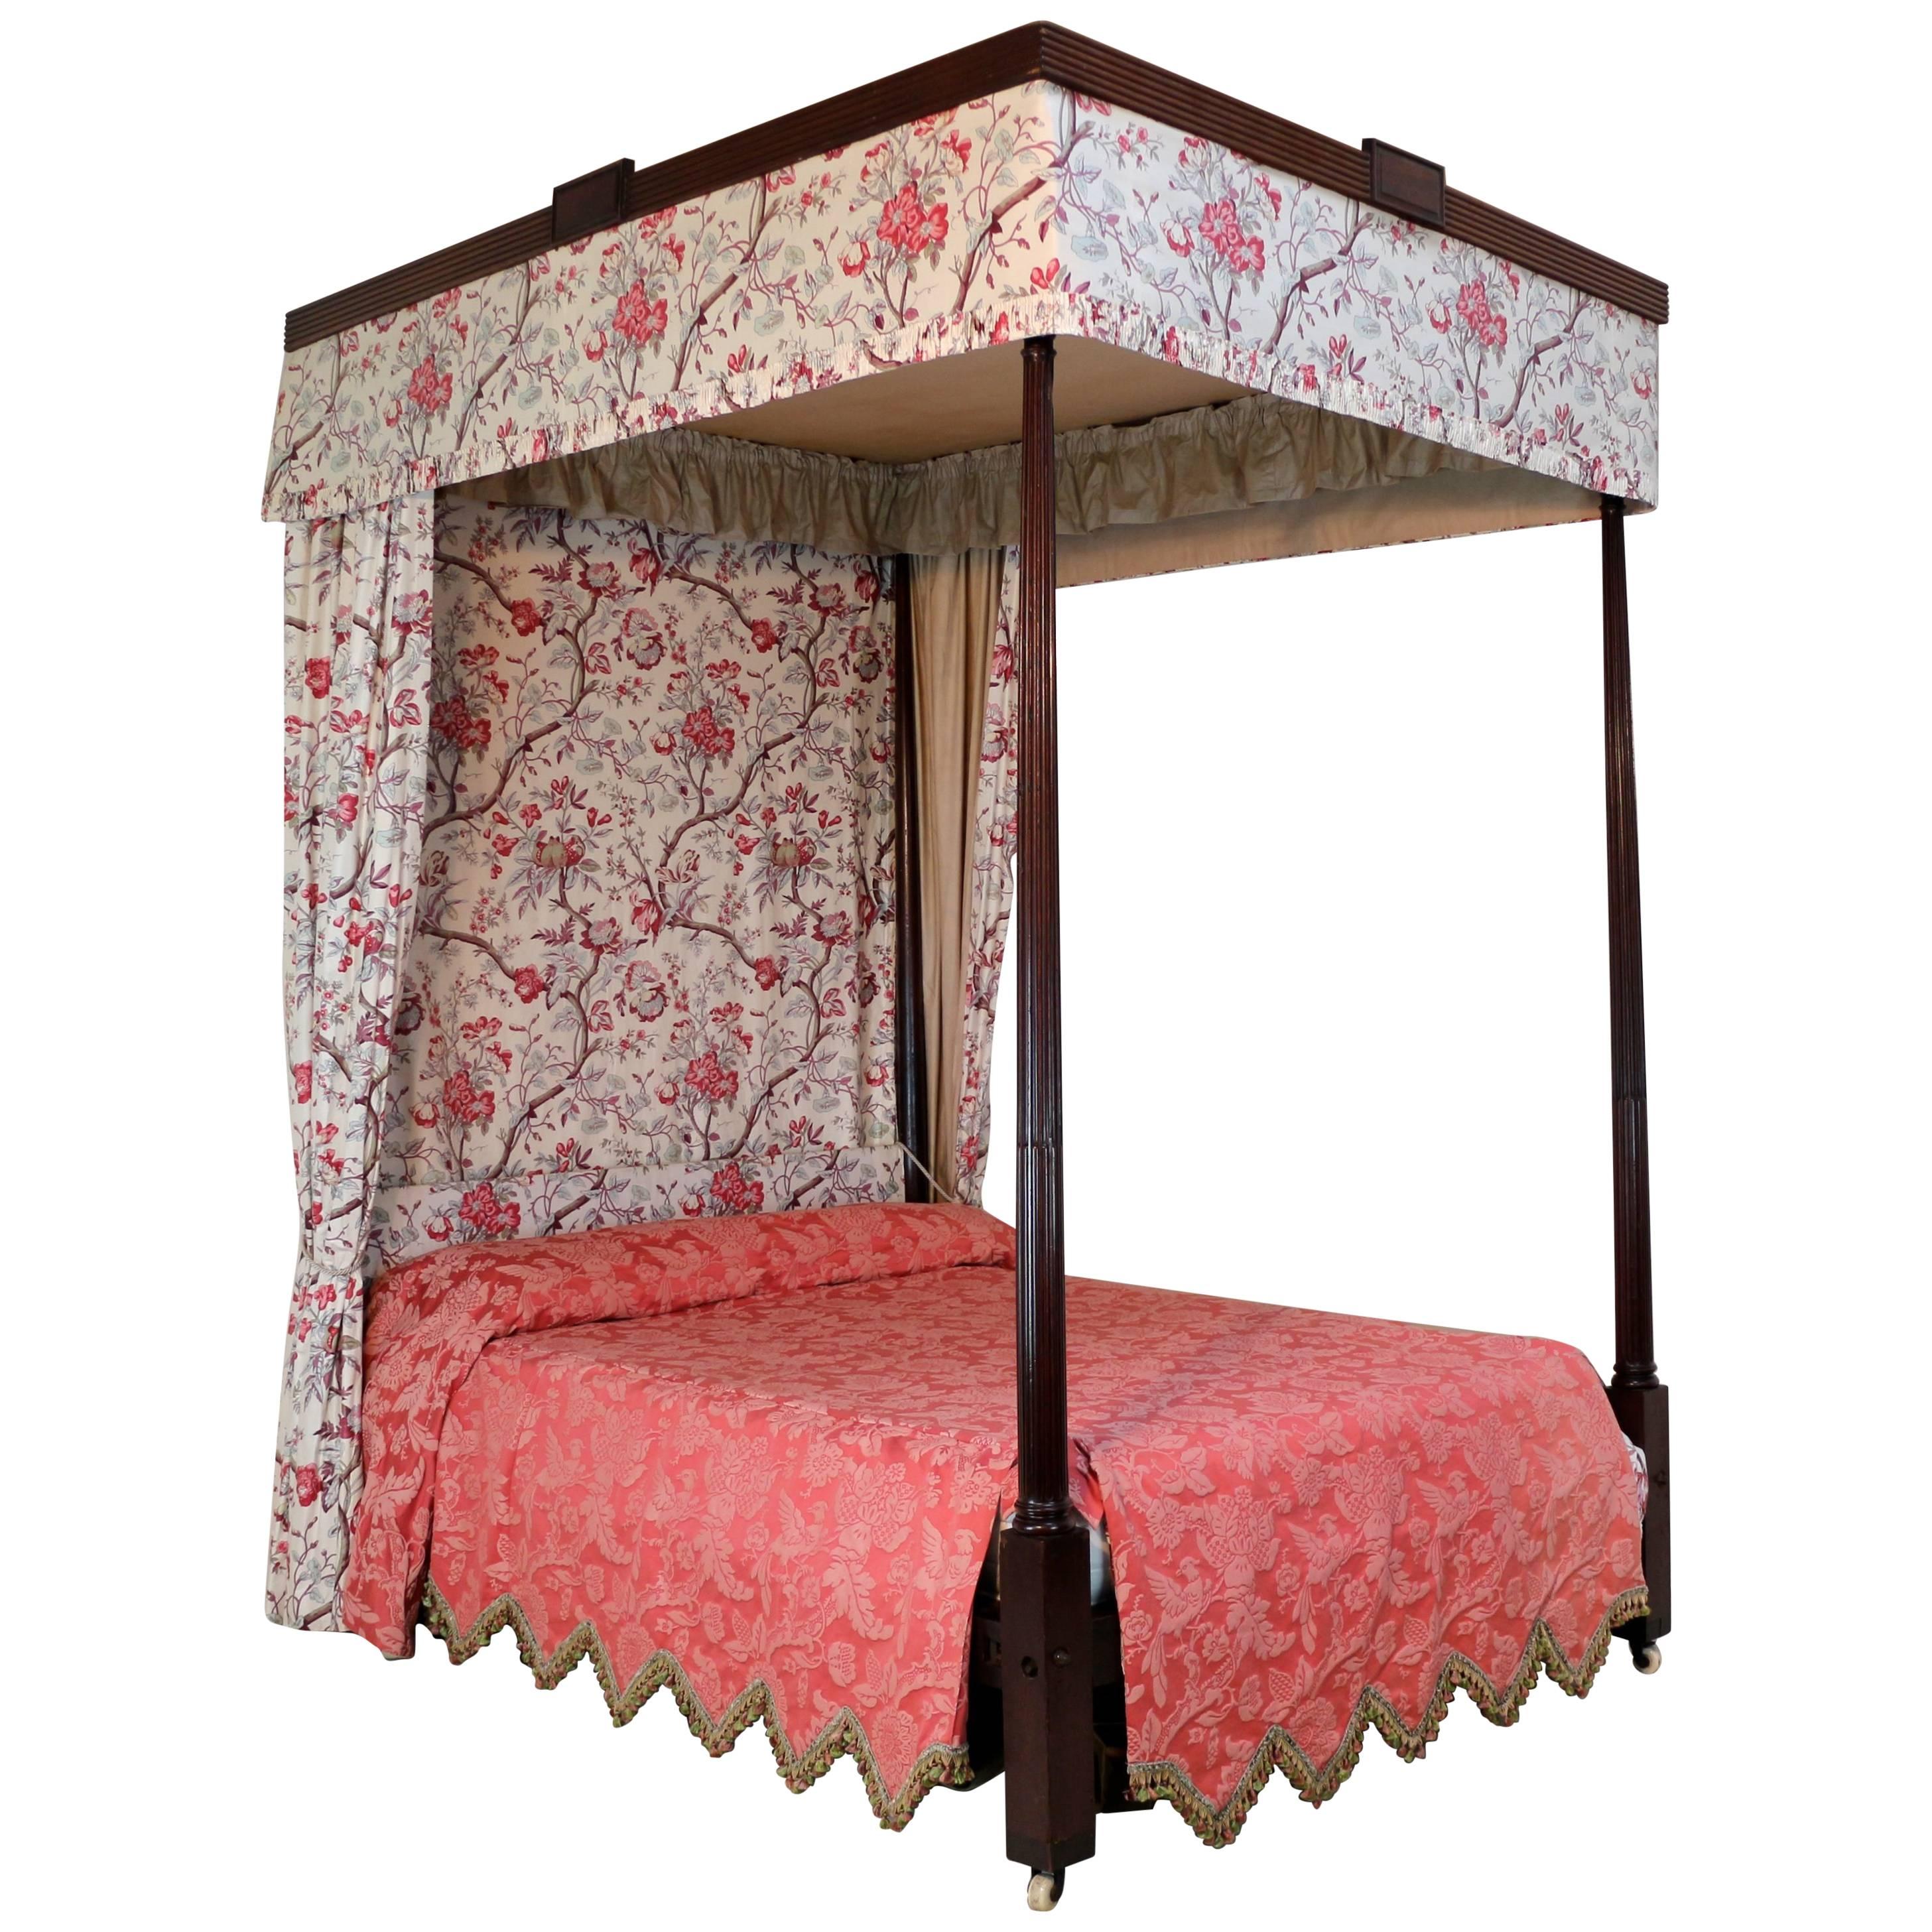 George III Mahogany Four-Poster Bed, Attributed to Gillows of Lancaster